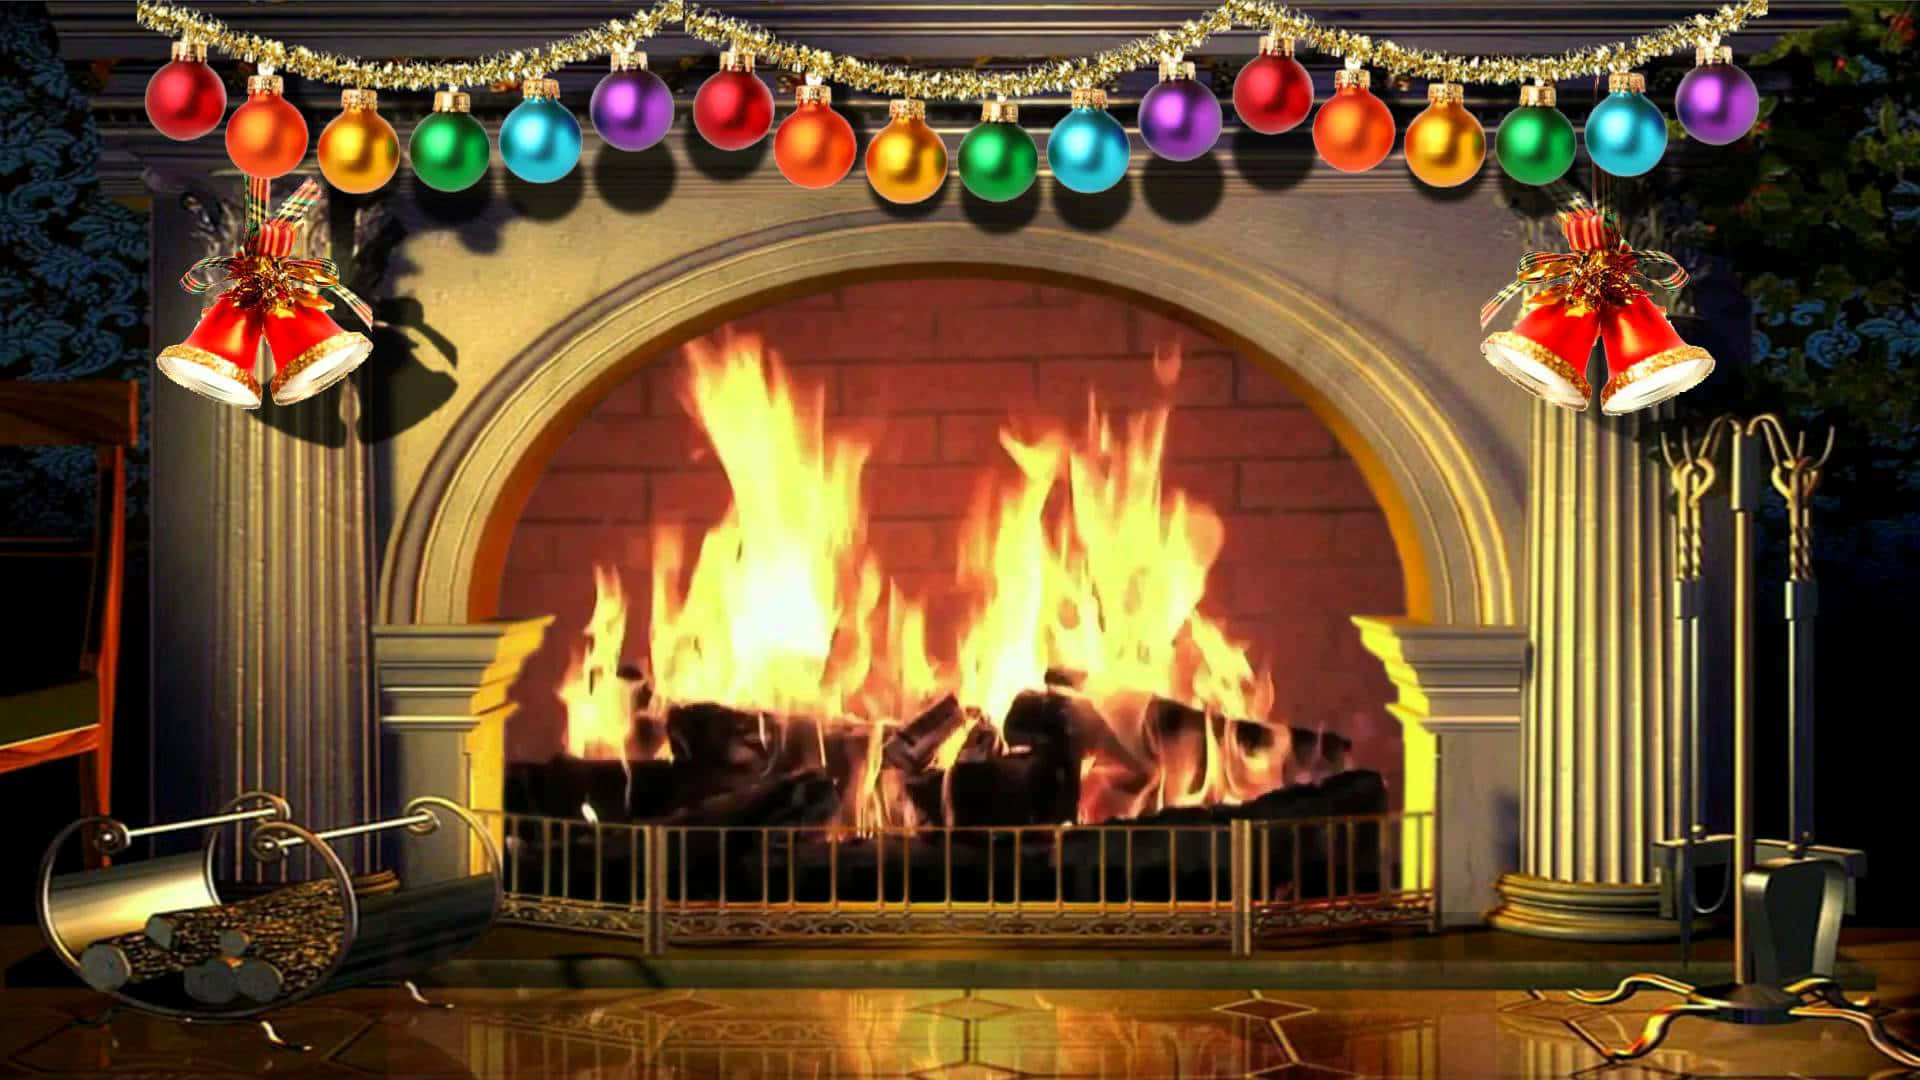 Christmas Fireplace With Colorful Ornaments Background